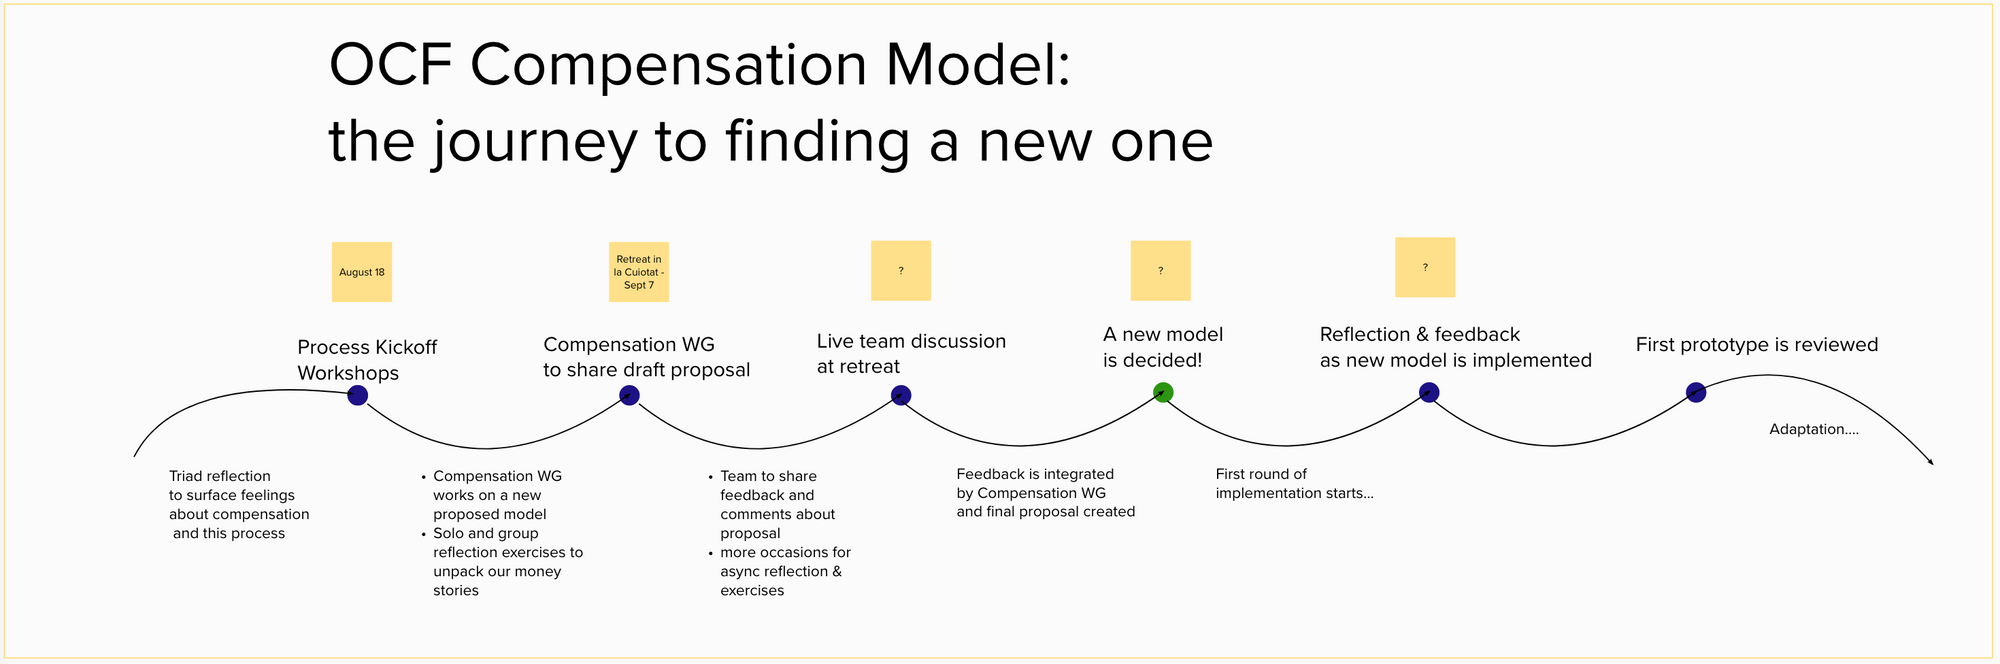 How OCF Developed a New Compensation Model (part 2)